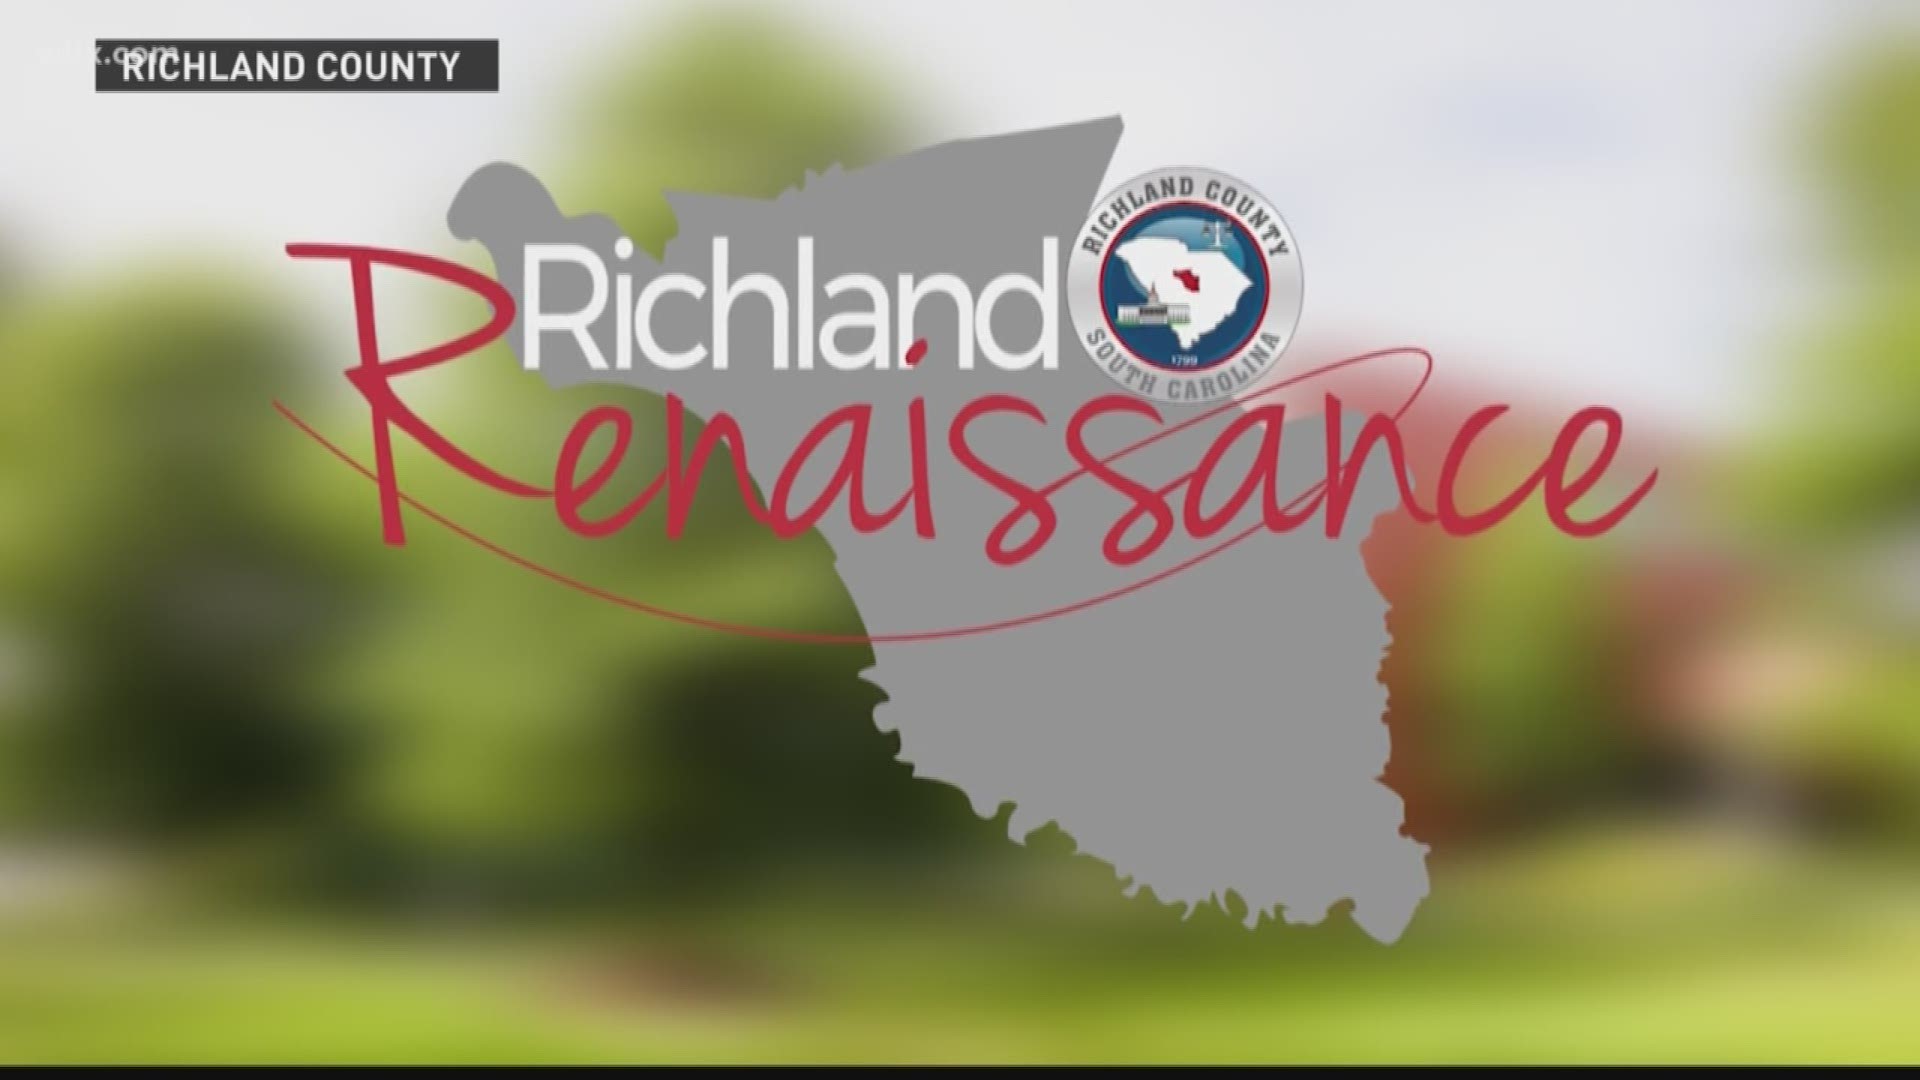 Richland county announced that their new interim county administrator has started.